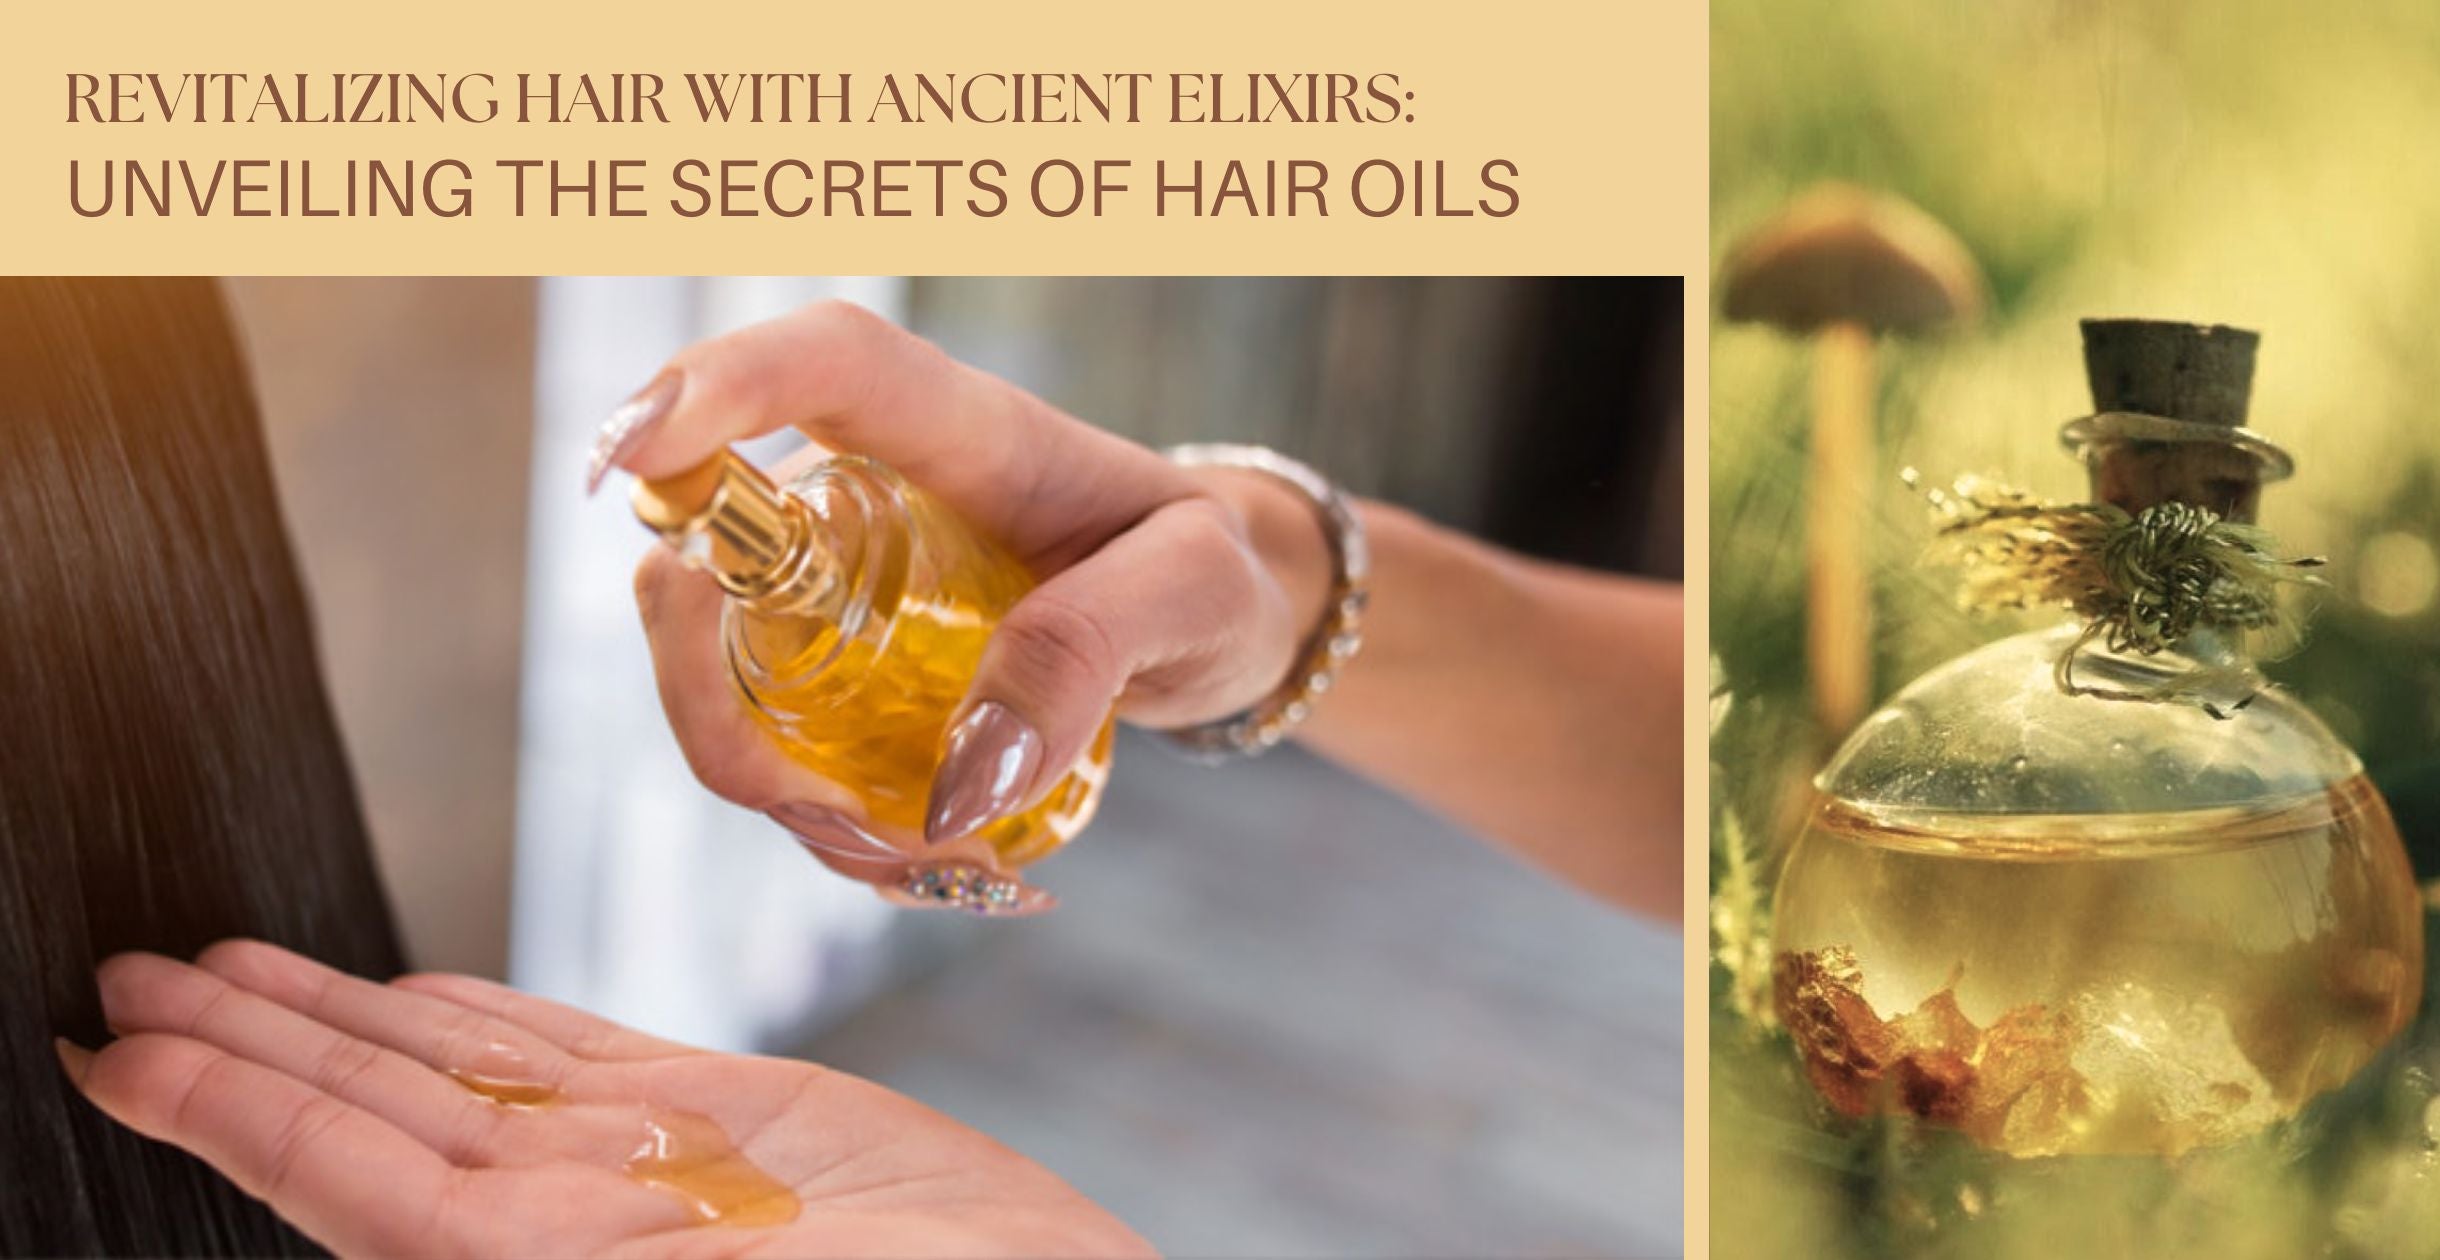 Revitalizing Hair with Ancient Elixirs: Unveiling the Secrets of Hair Oils